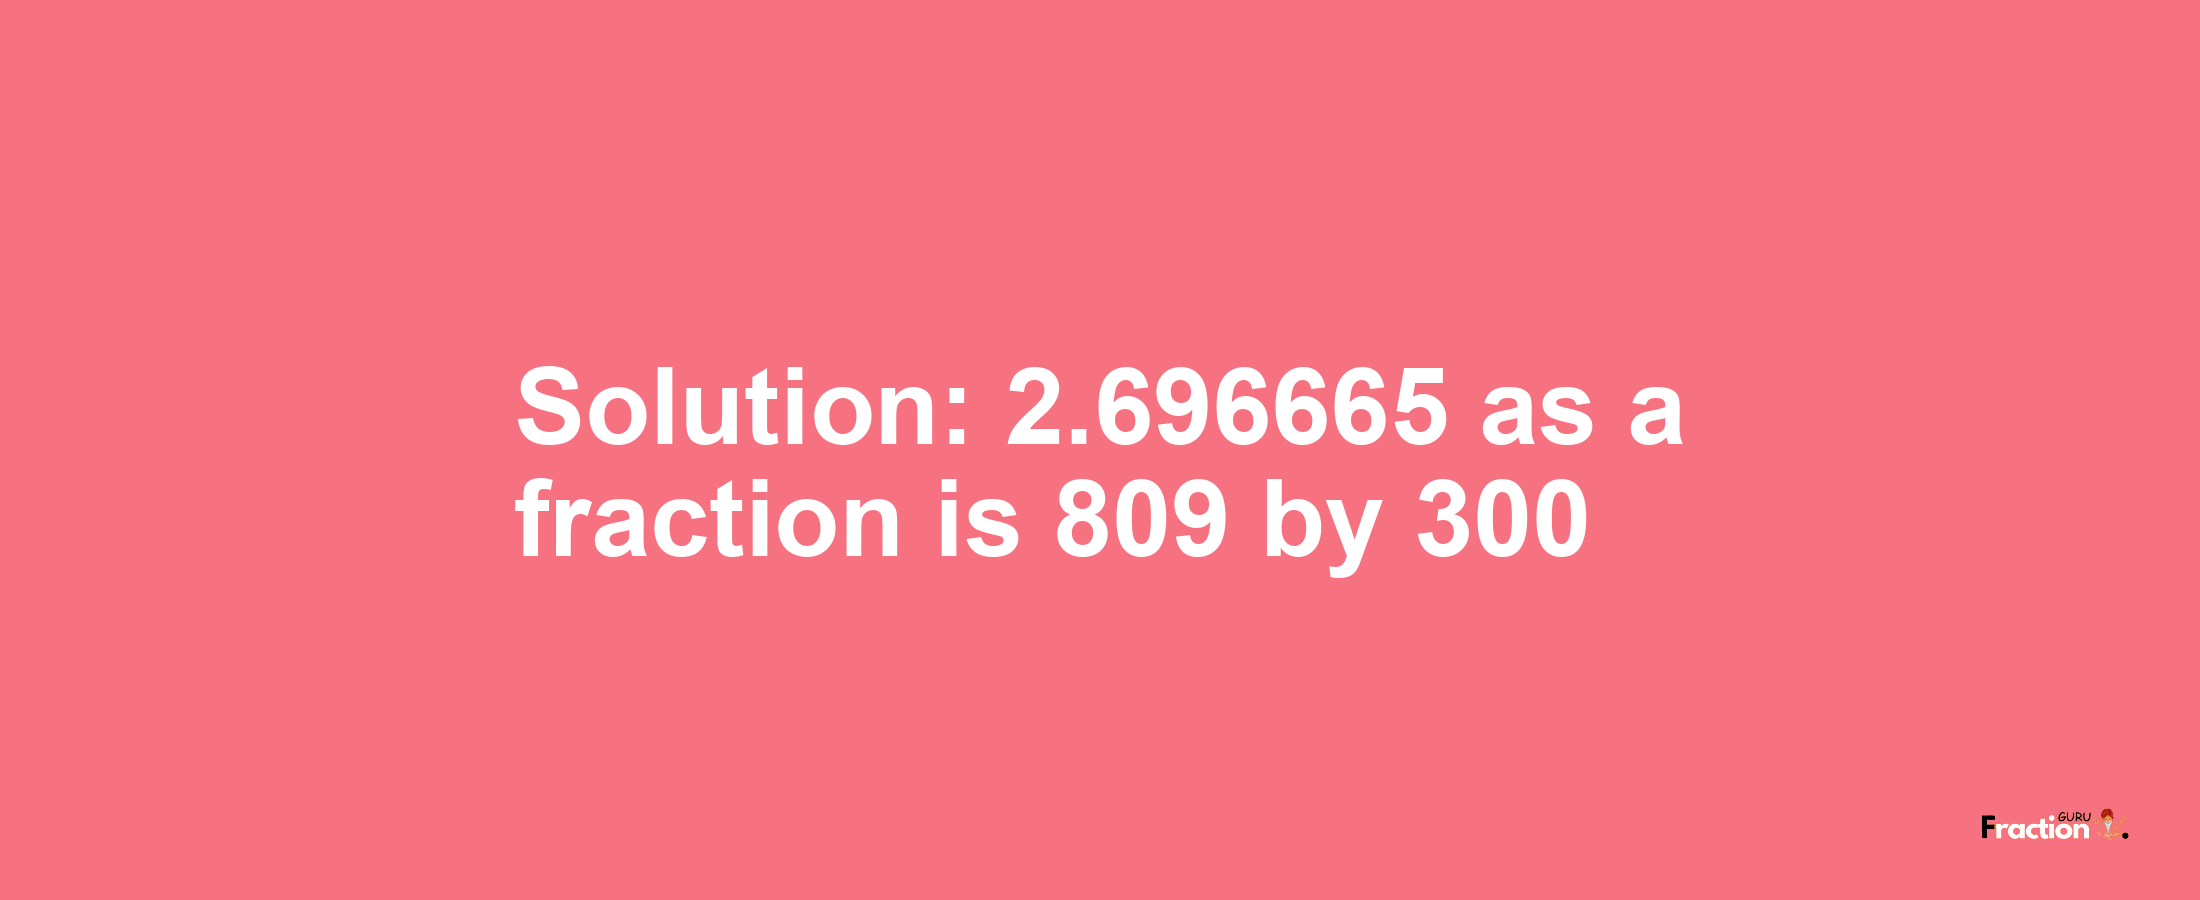 Solution:2.696665 as a fraction is 809/300